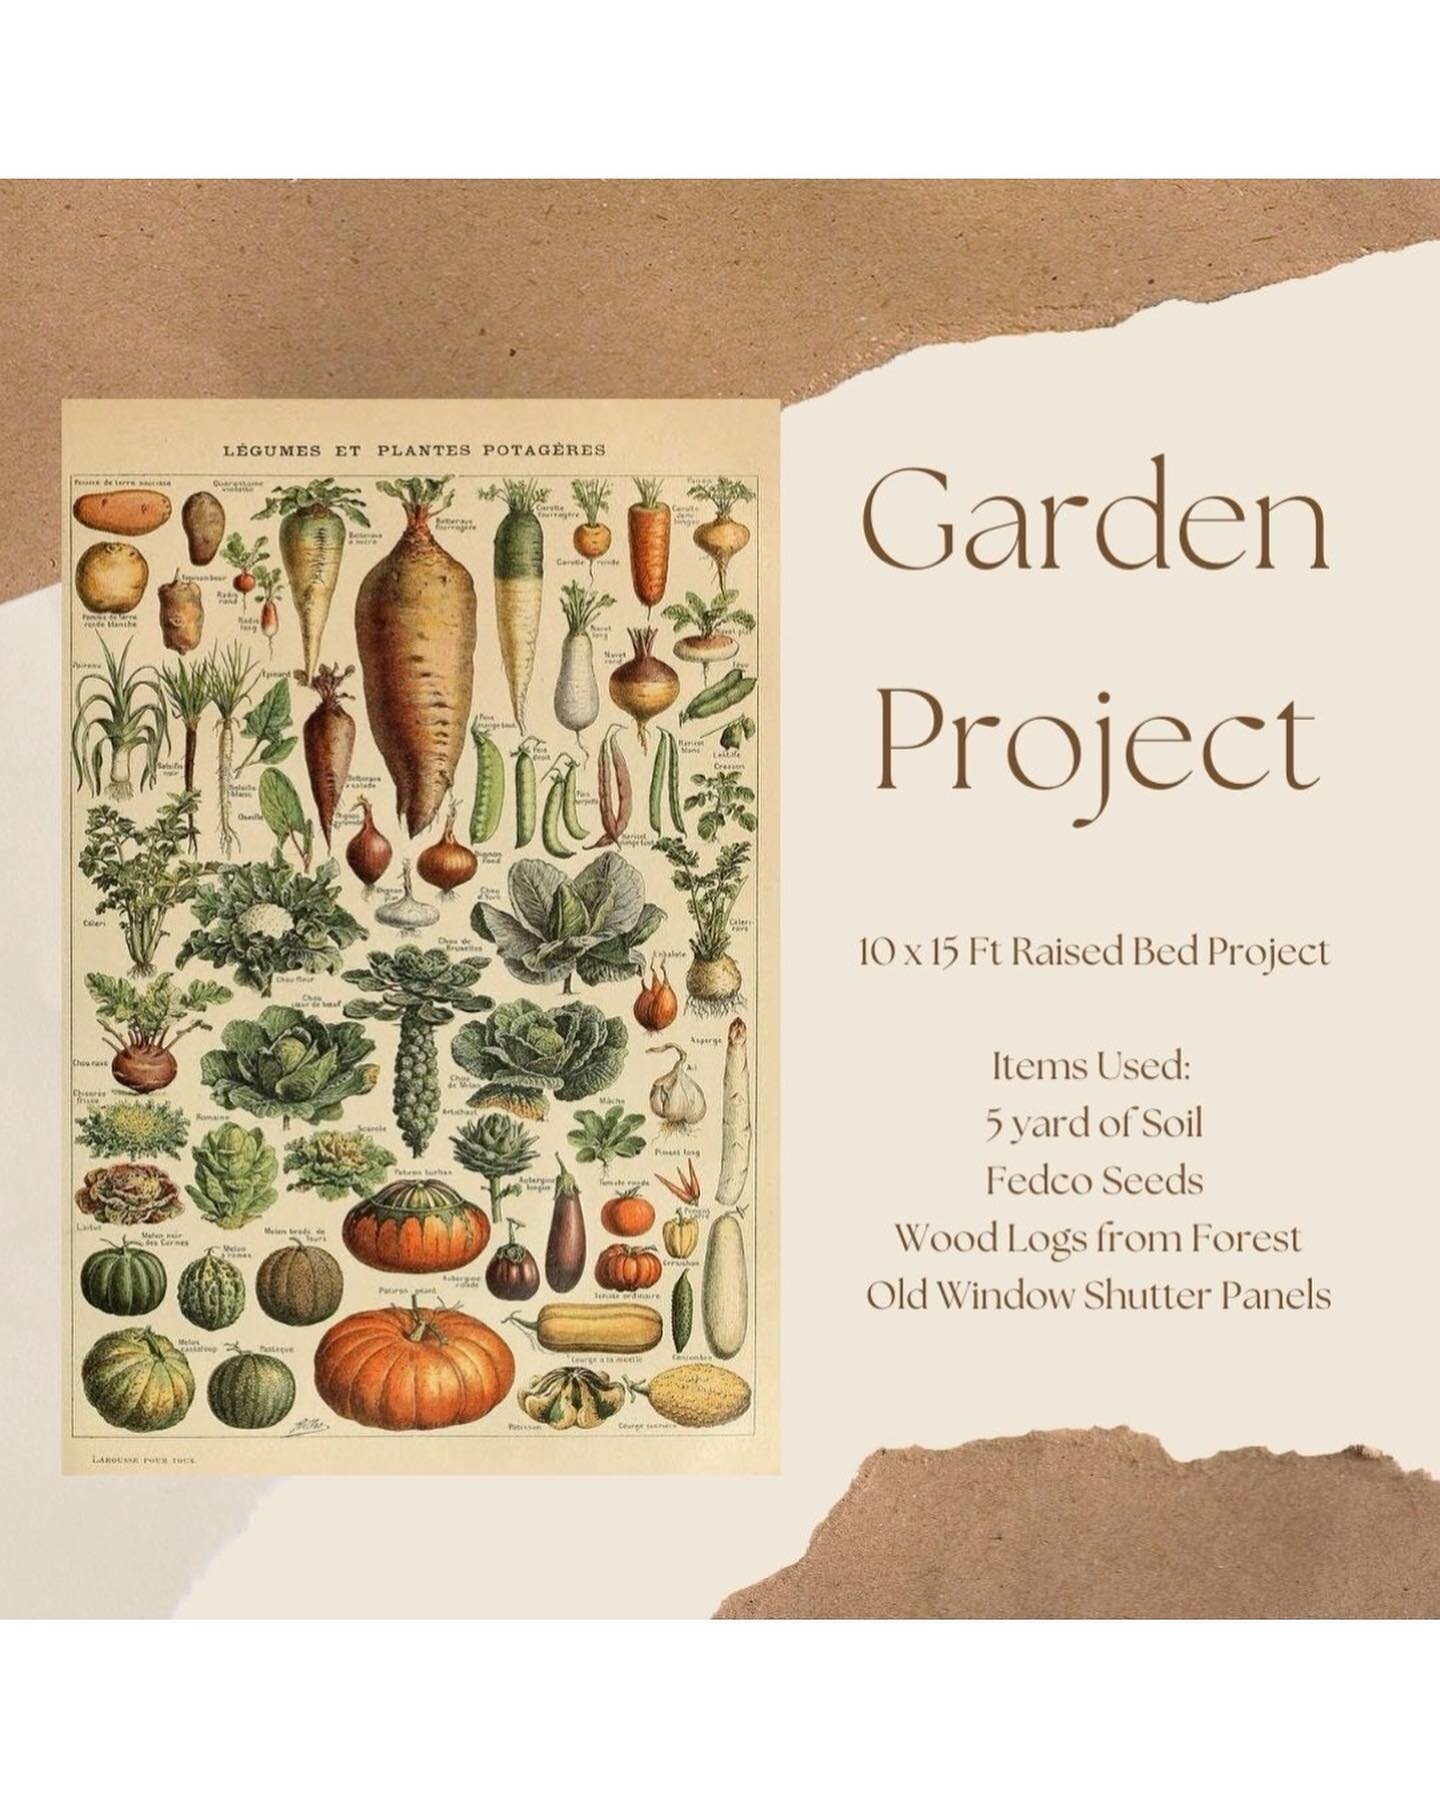 🥦 🥒Garden Project Reveal 🥕 🥬 

This was a very fun project for me and one I&rsquo;m pretty damn proud of. I am very much a non expert when it comes to gardening but I think it&rsquo;s important to at least experiment and see how something you wan